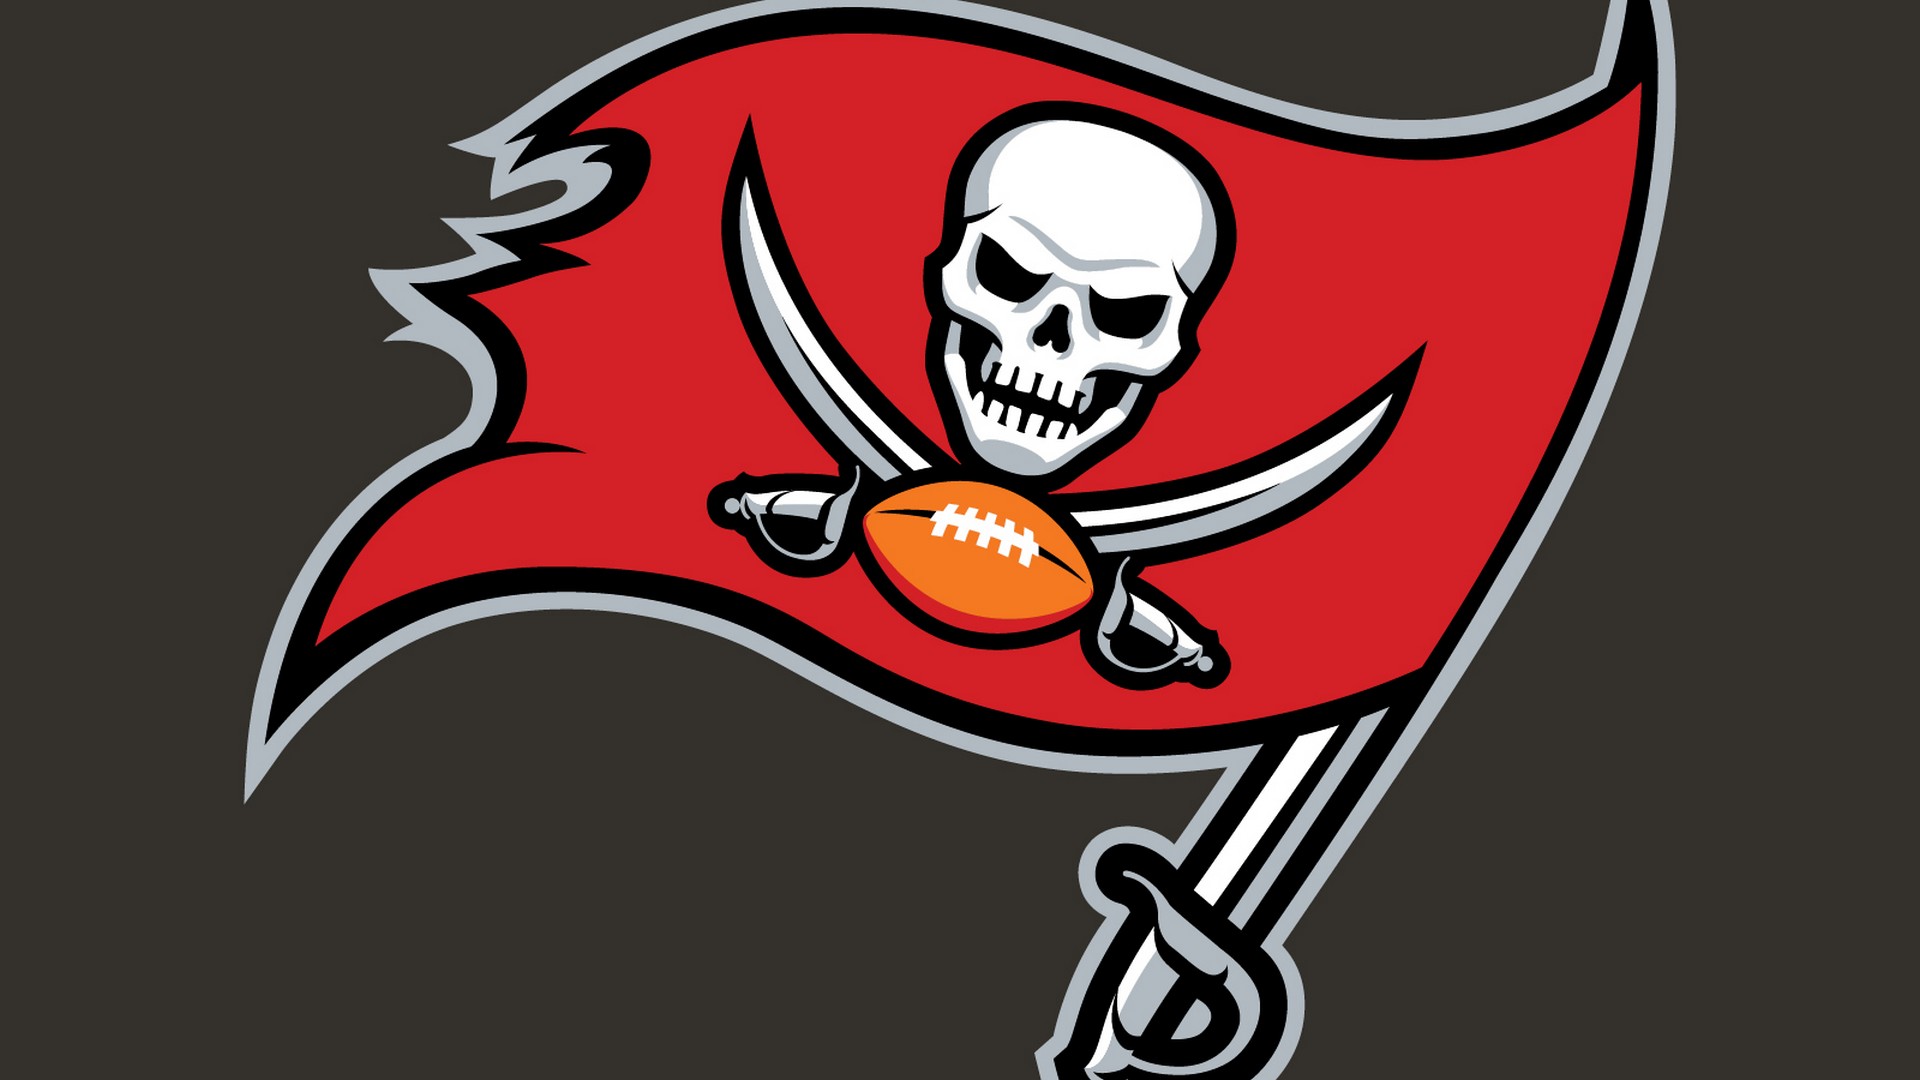 Buccaneers Laptop Wallpaper with high-resolution 1920x1080 pixel. Download and set as wallpaper for Desktop Computer, Apple iPhone X, XS Max, XR, 8, 7, 6, SE, iPad, Android